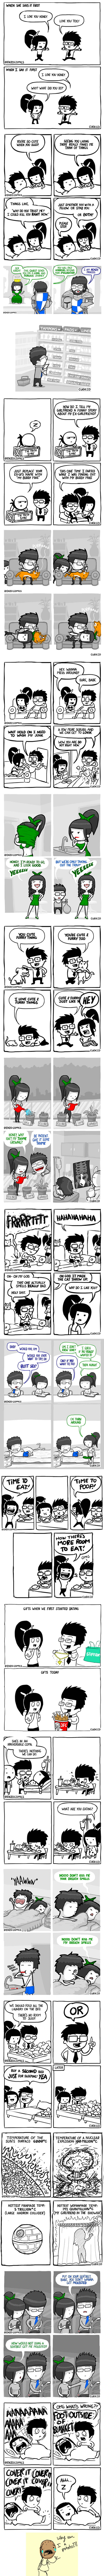 10+ Comics Perfectly Describe What Being In A Long-Term Relationship Is Like